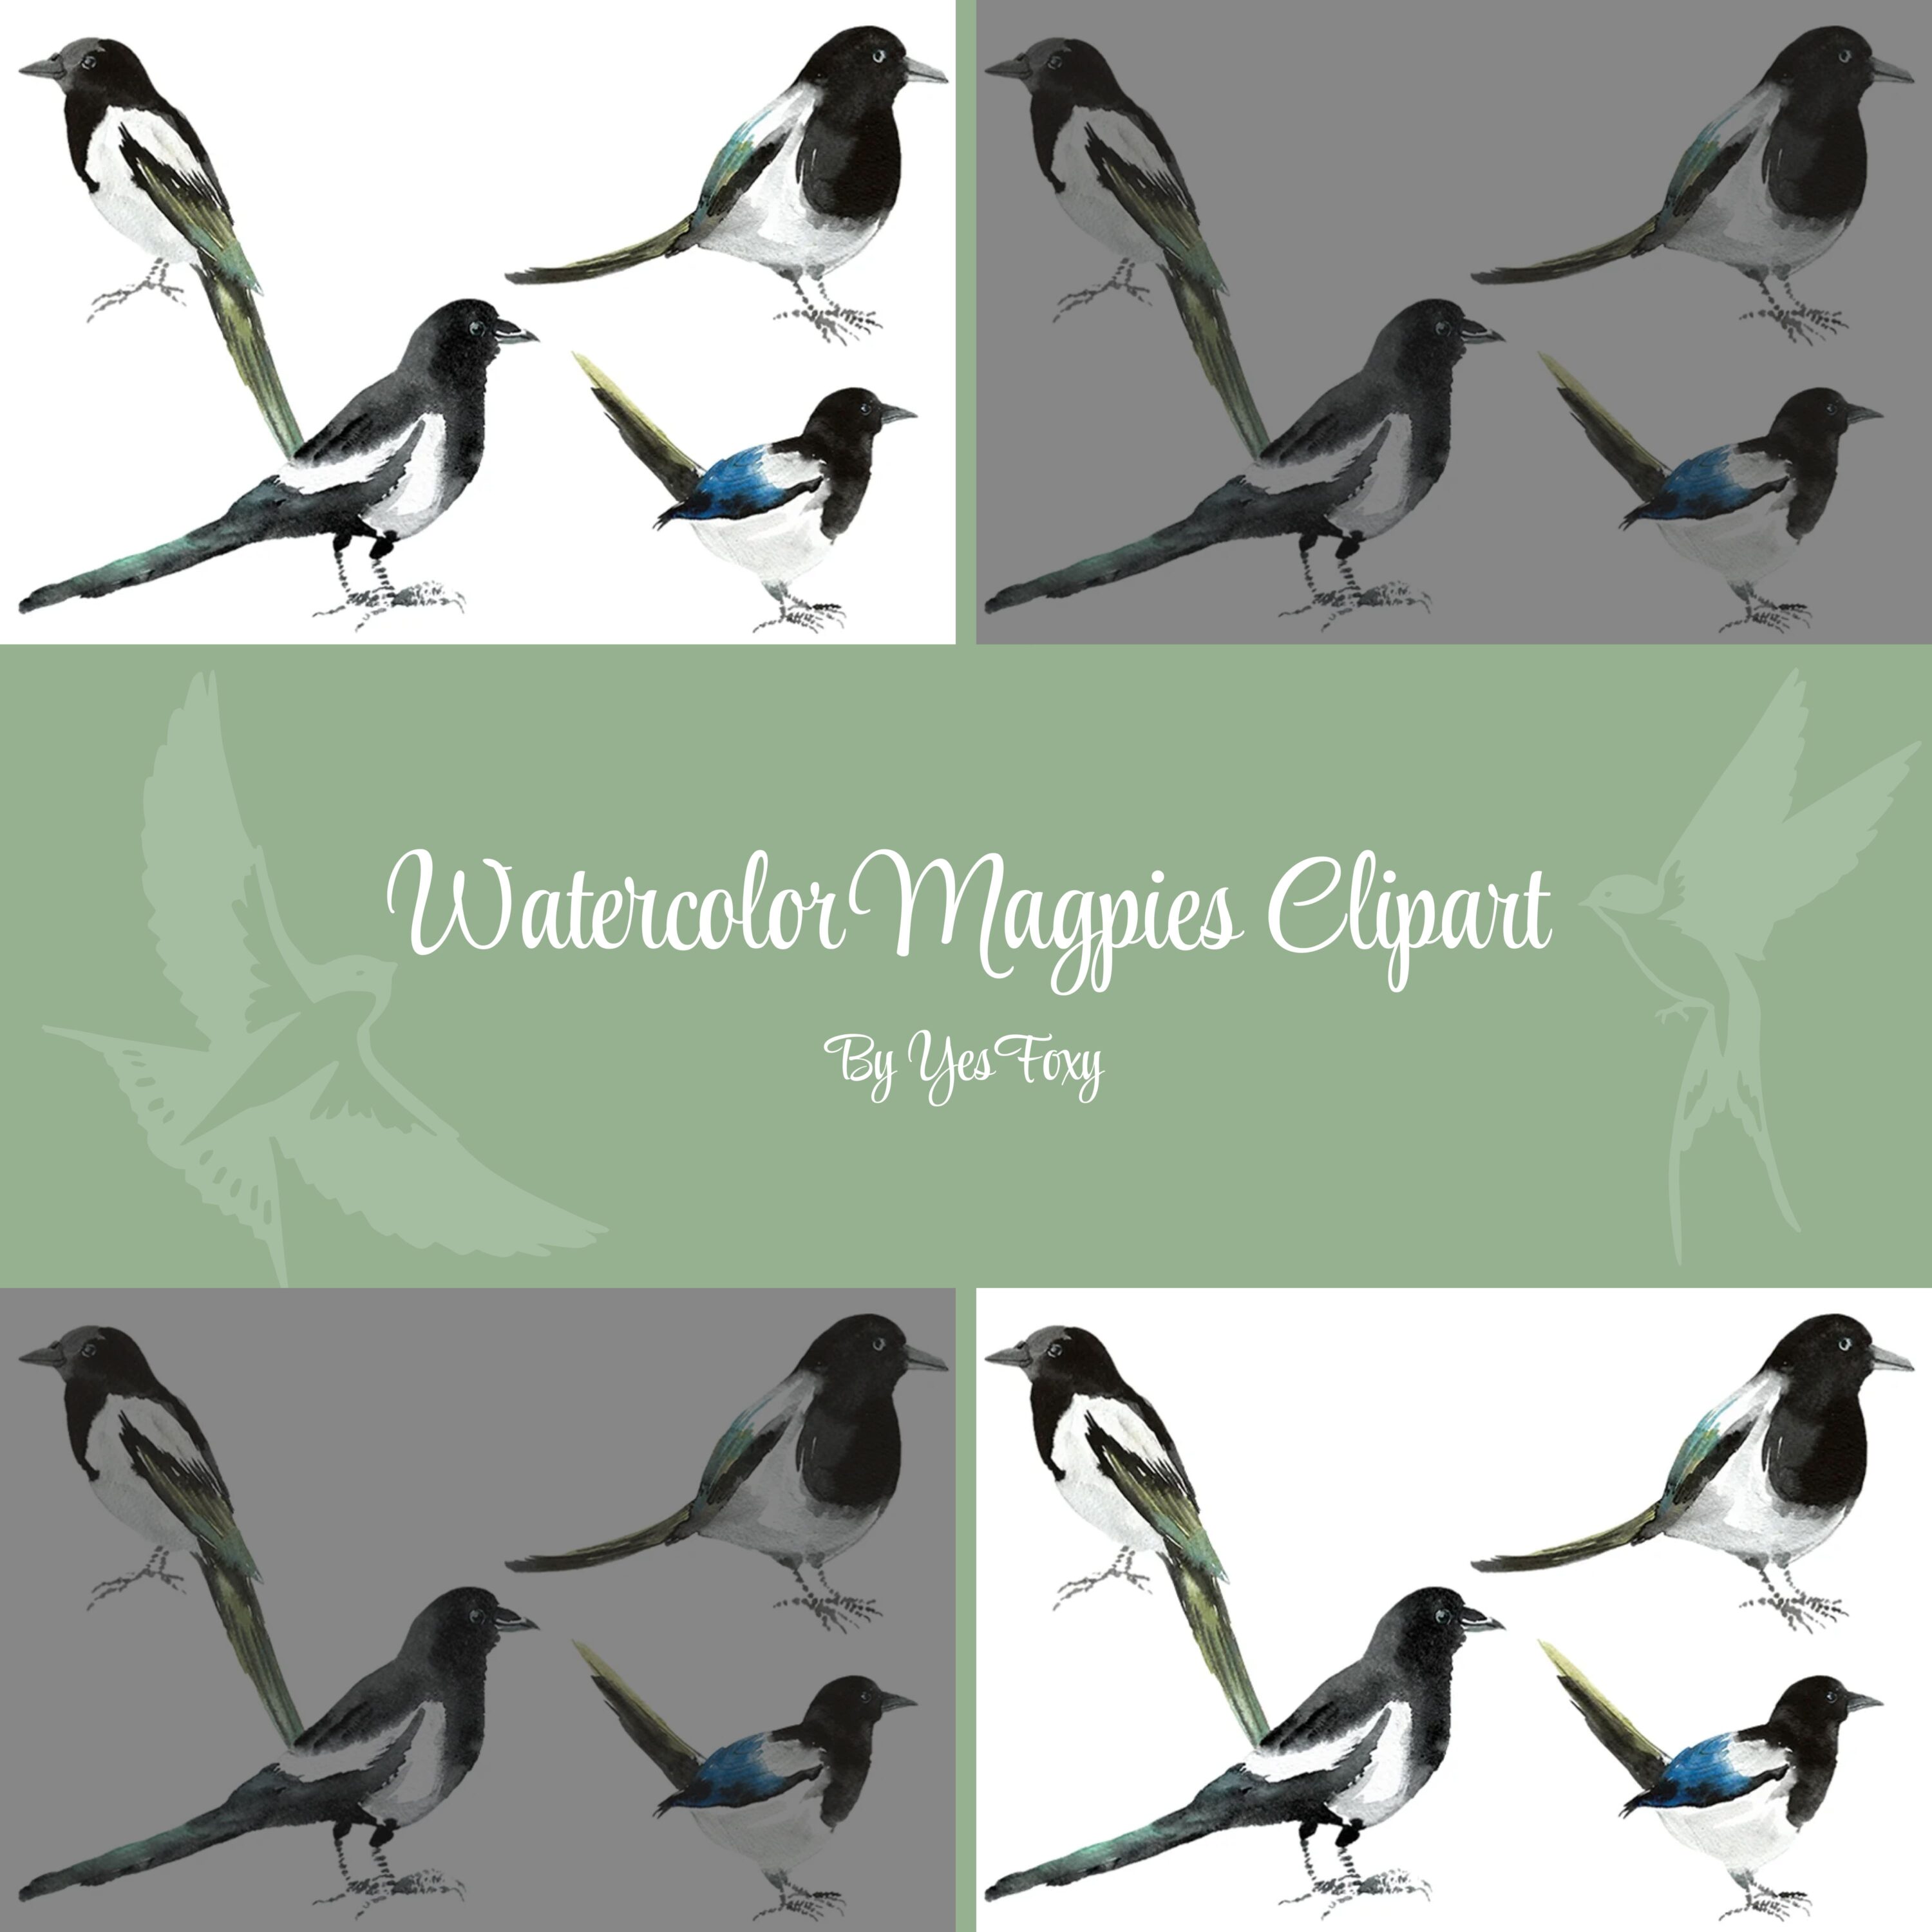 Watercolor Magpies Clipart cover image.